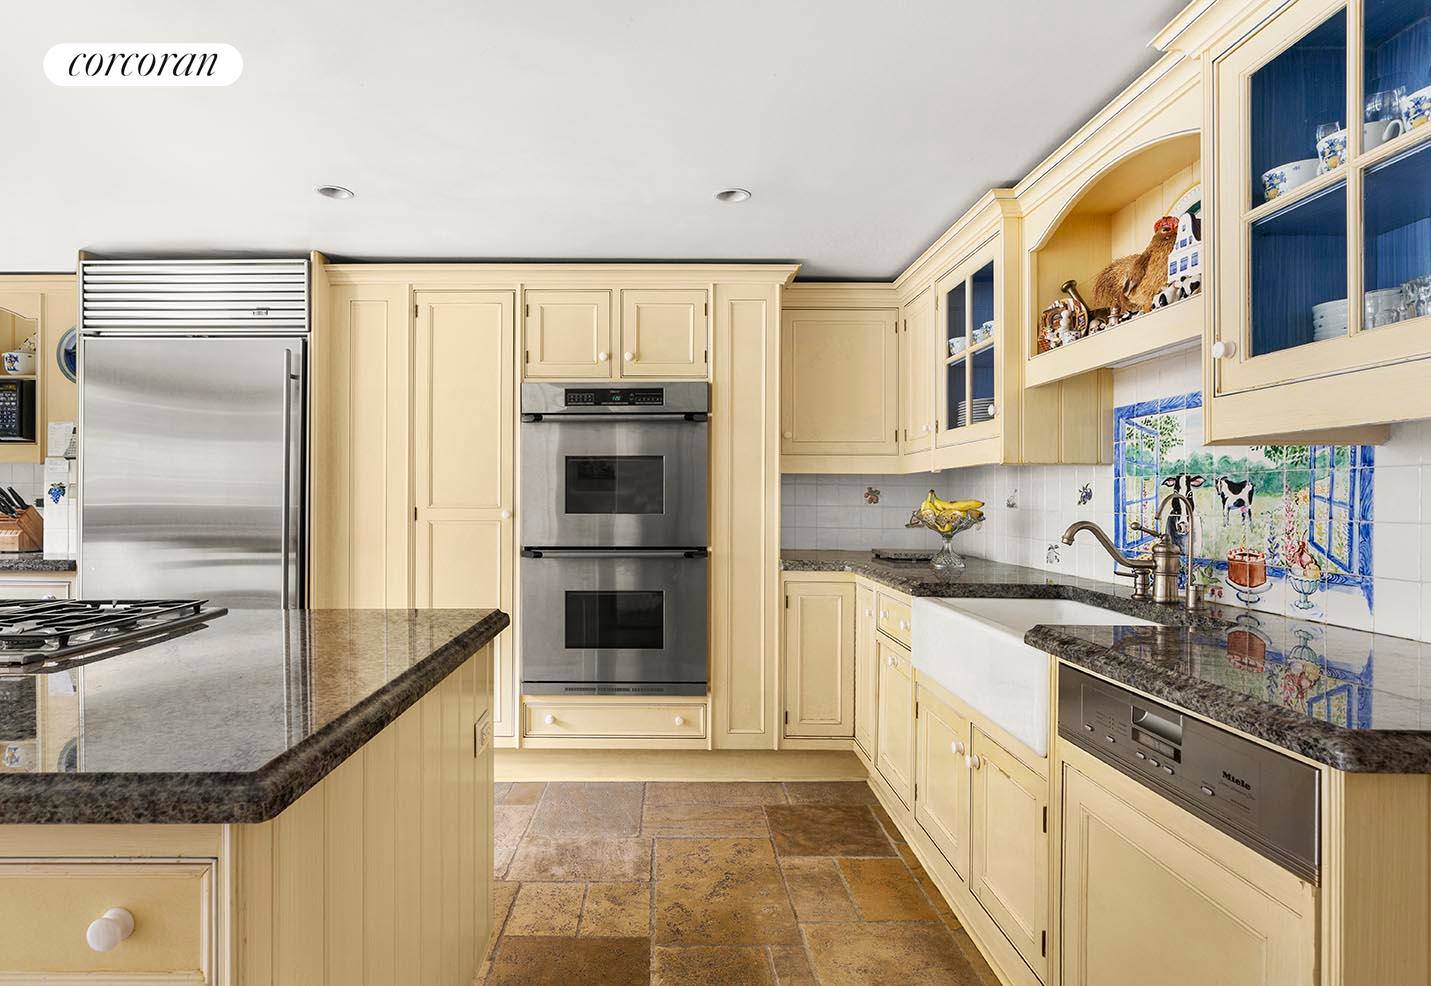 Available for the first time in 60 years, don't miss this opportunity to own a rare 22' wide light filled six bed, four bath, brick townhouse that feels like a ...